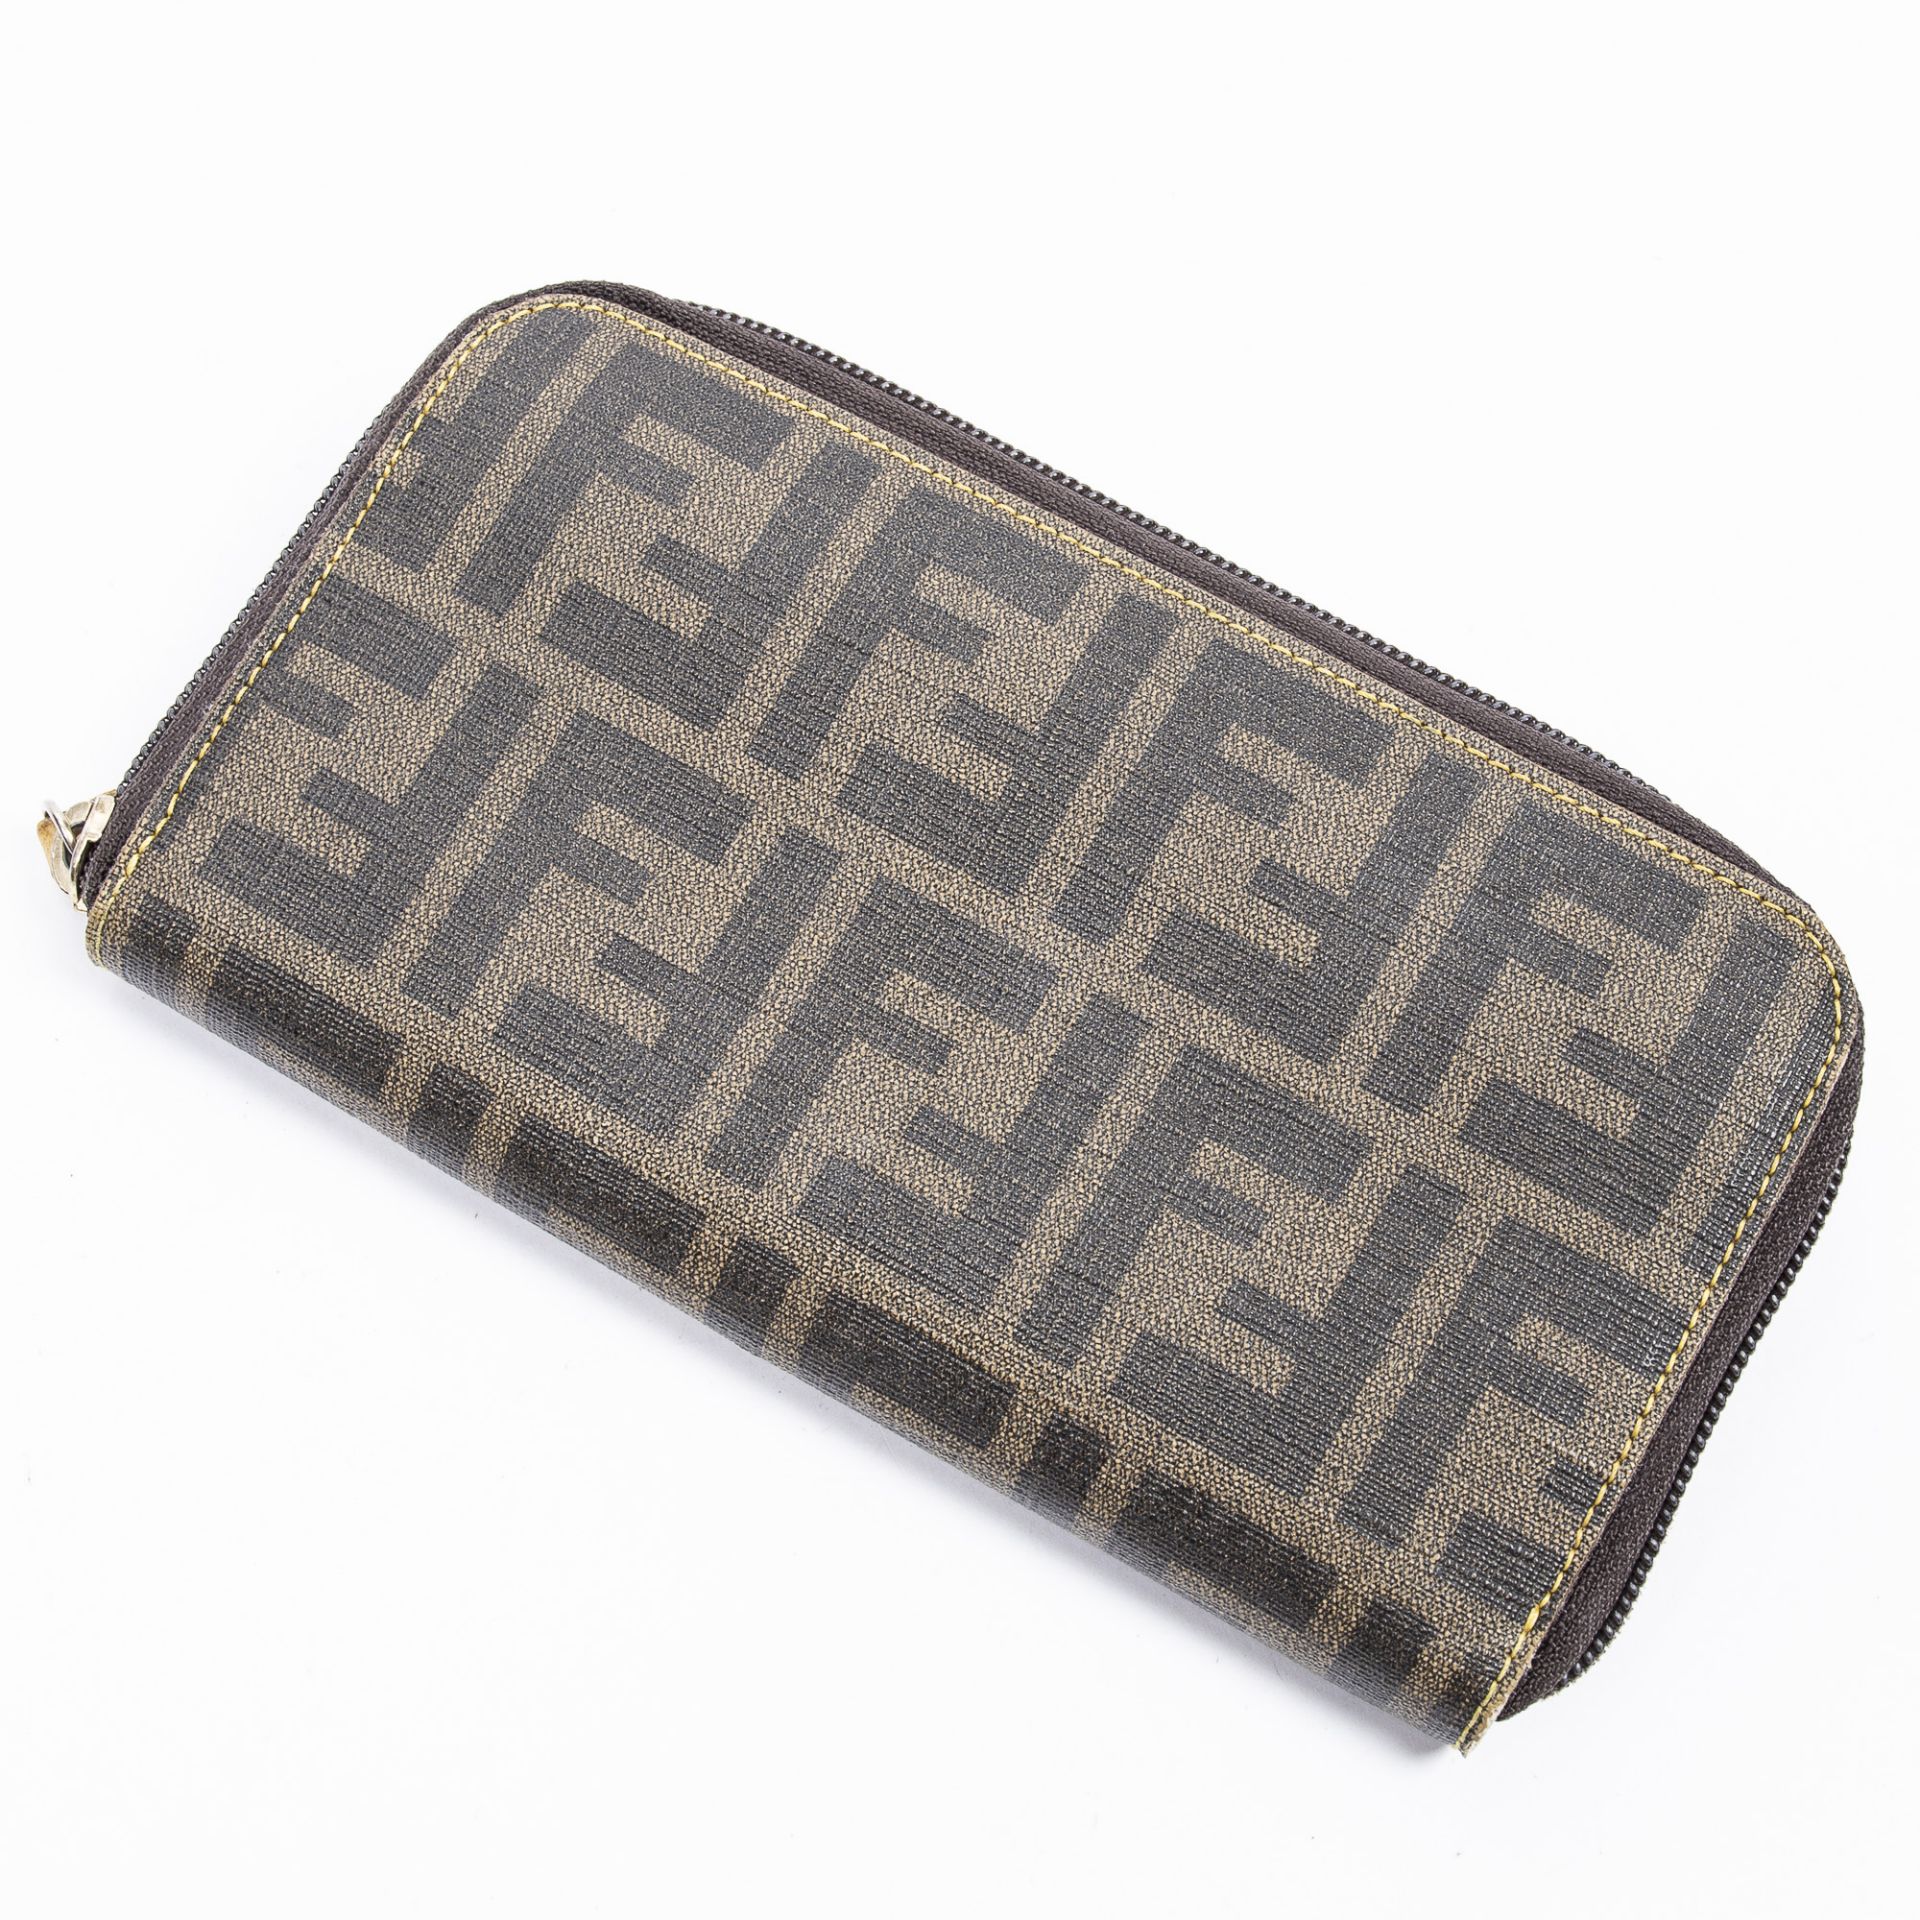 RRP £750.00 Lot To Contain 1 Fendi Coated Canvas Zip Around Wallet In Black/Khaki - 20*11*2cm - AB - - Image 2 of 3